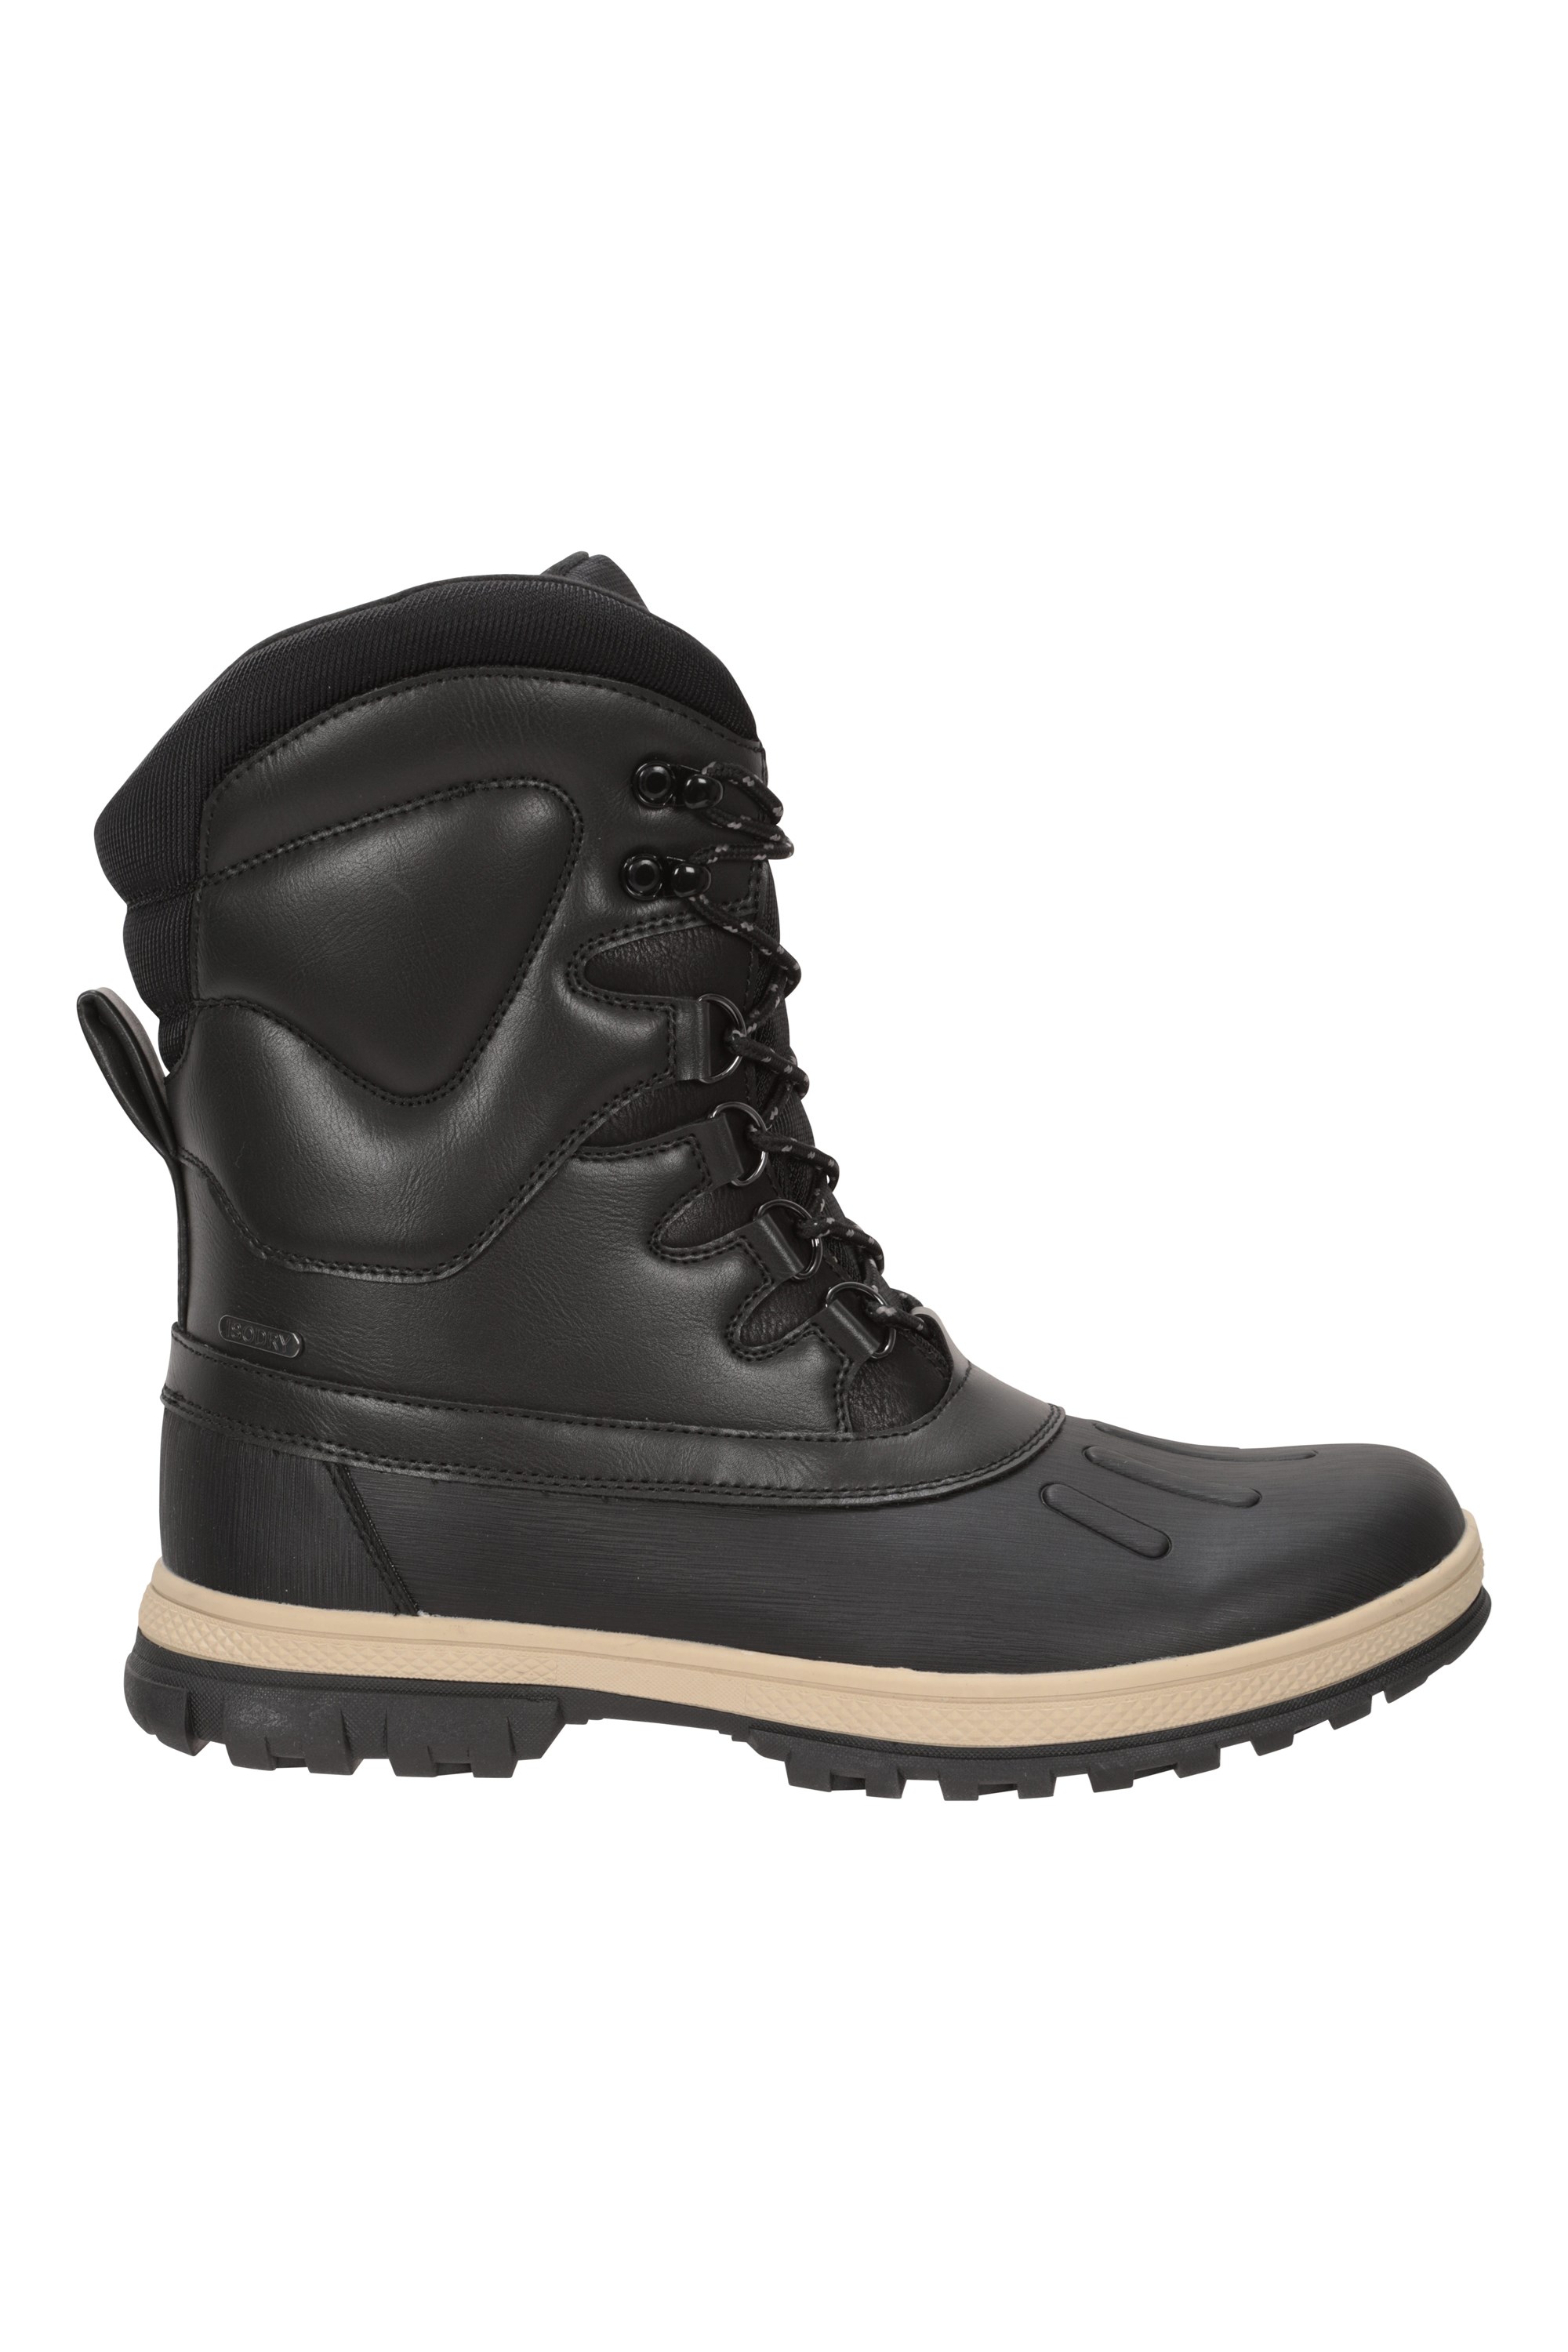 Arctic Thermal Mens Snow Boots